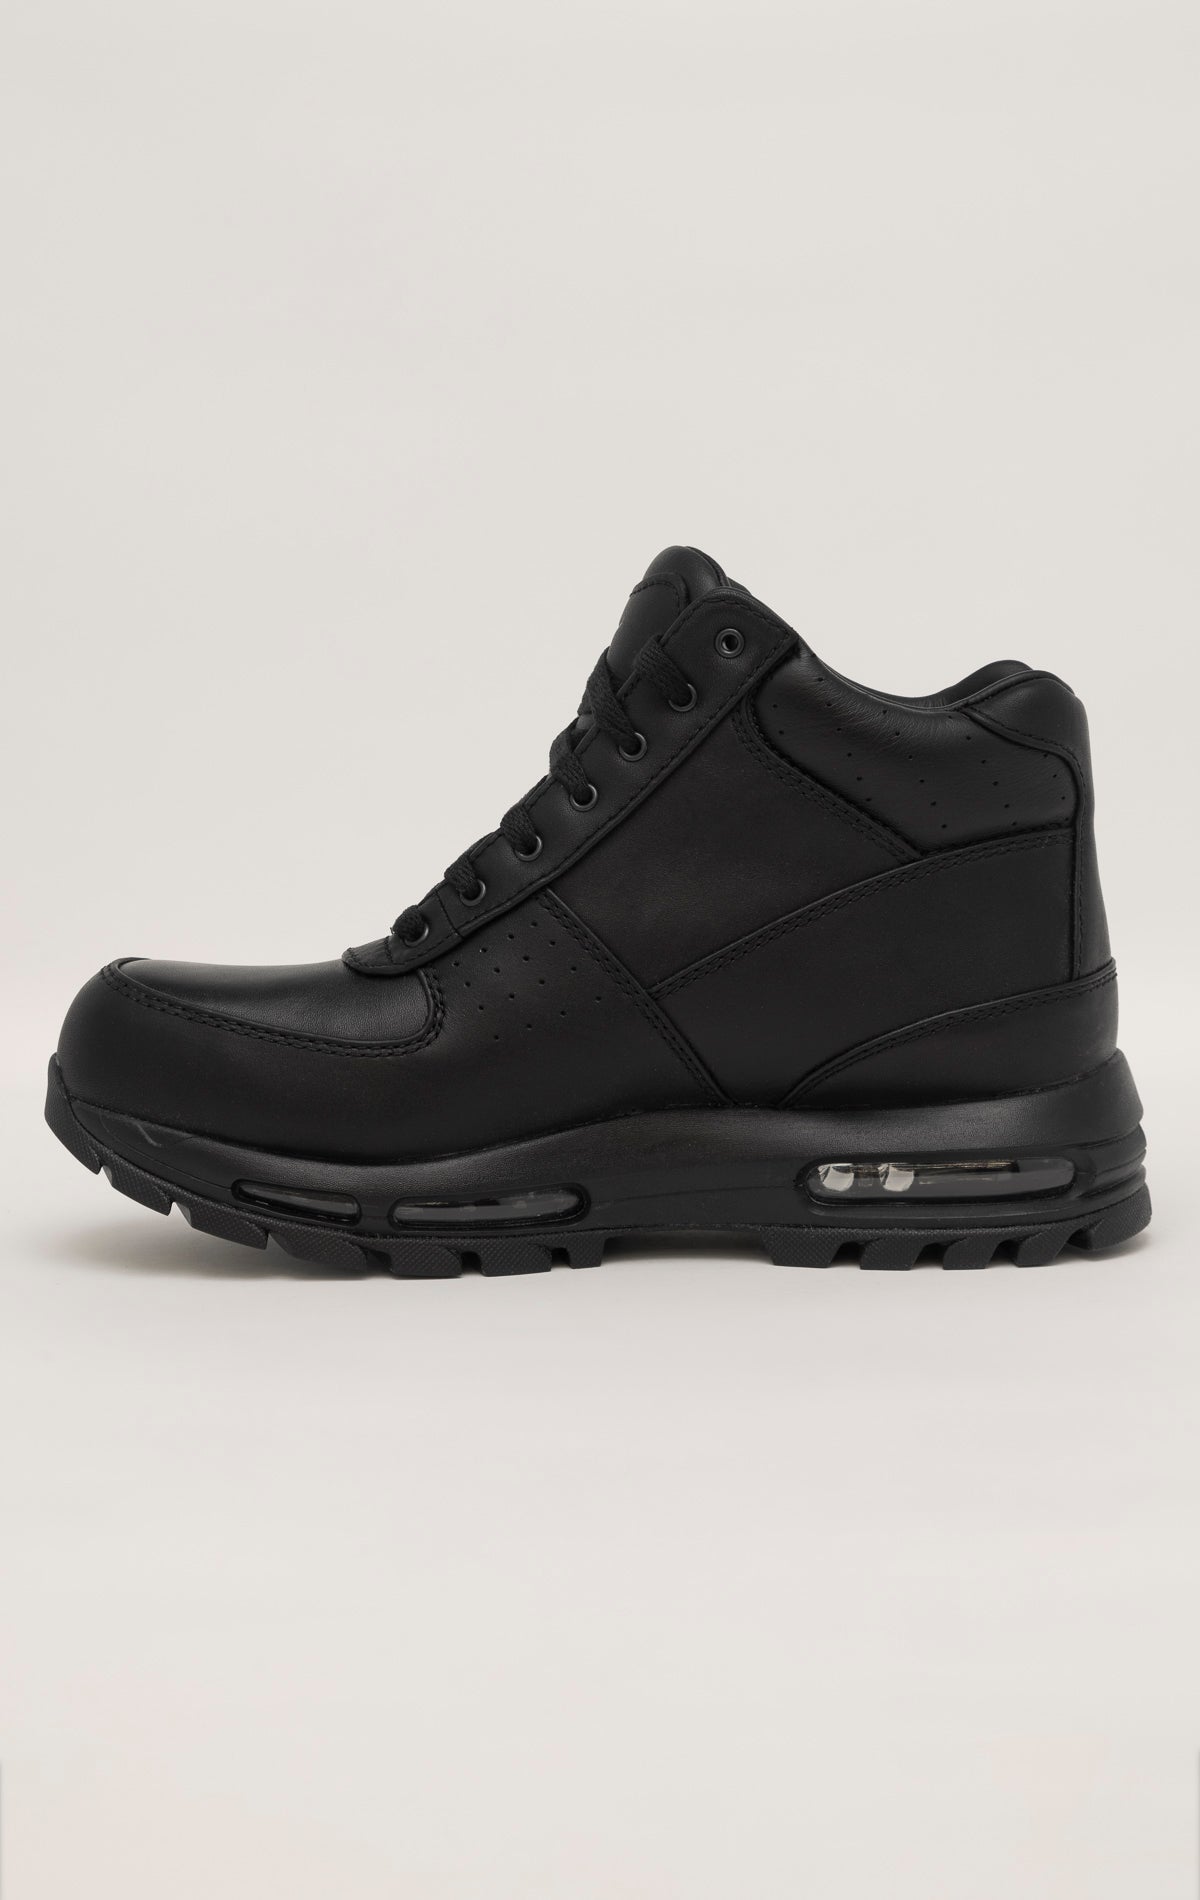 Black Nike Air Max Goadome sneakers with visible Air unit in the heel and lugged outsole for traction.